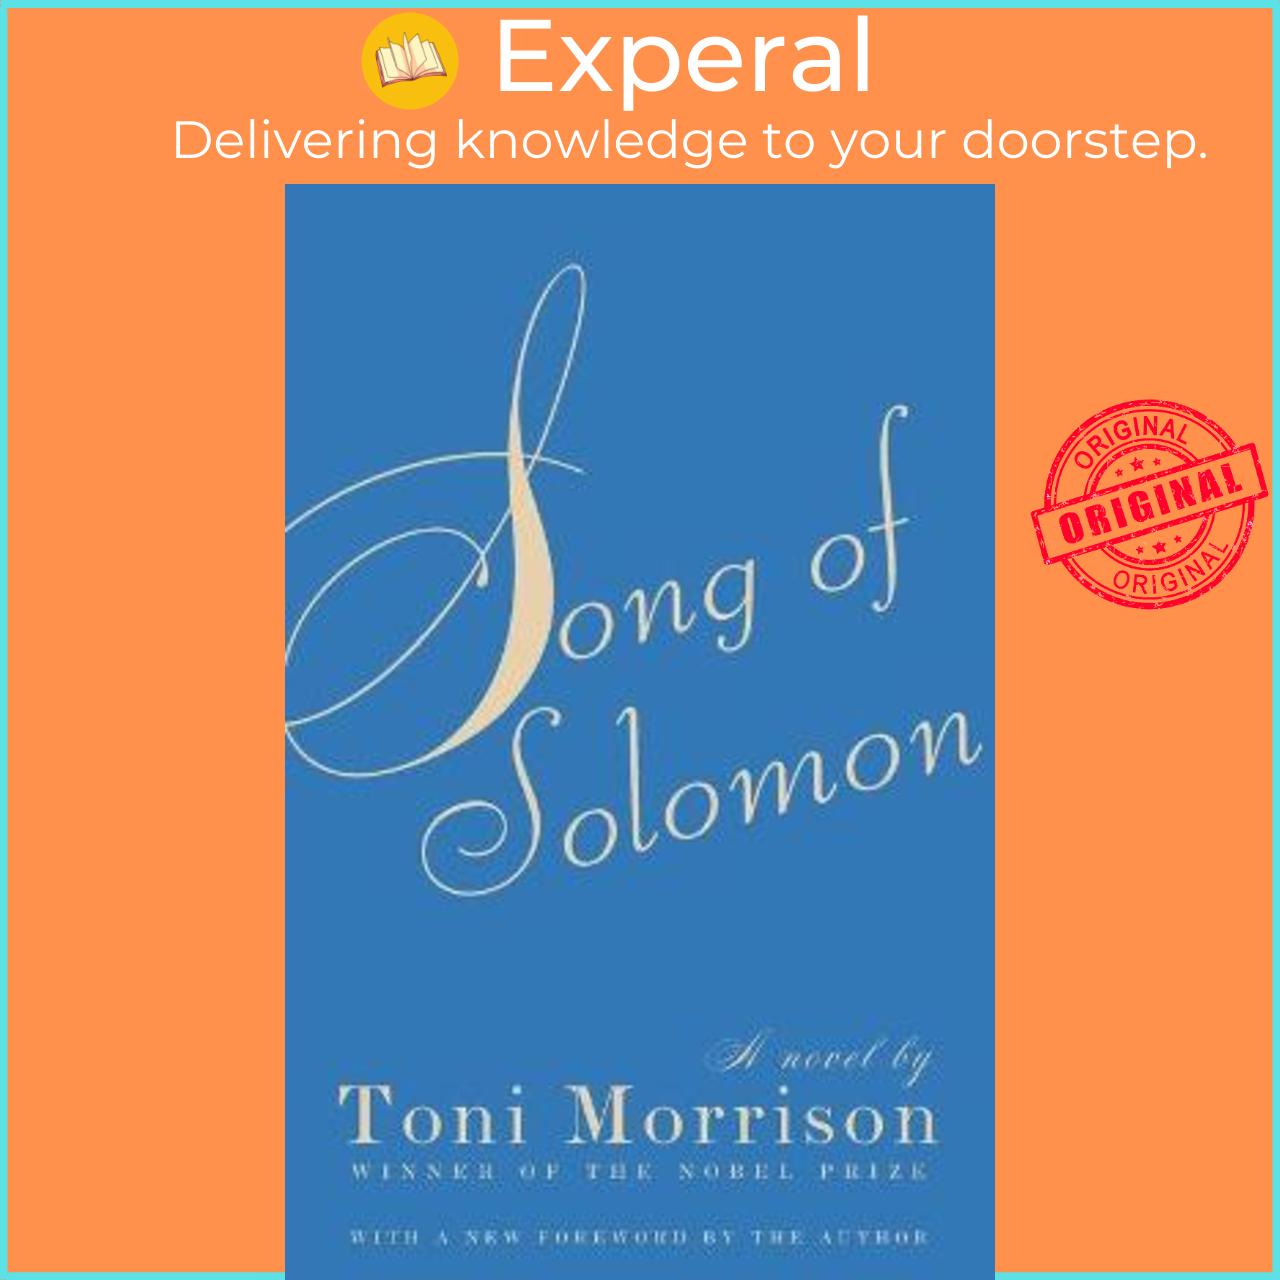 Sách - Song of Solomon by Toni Morrison (US edition, paperback)